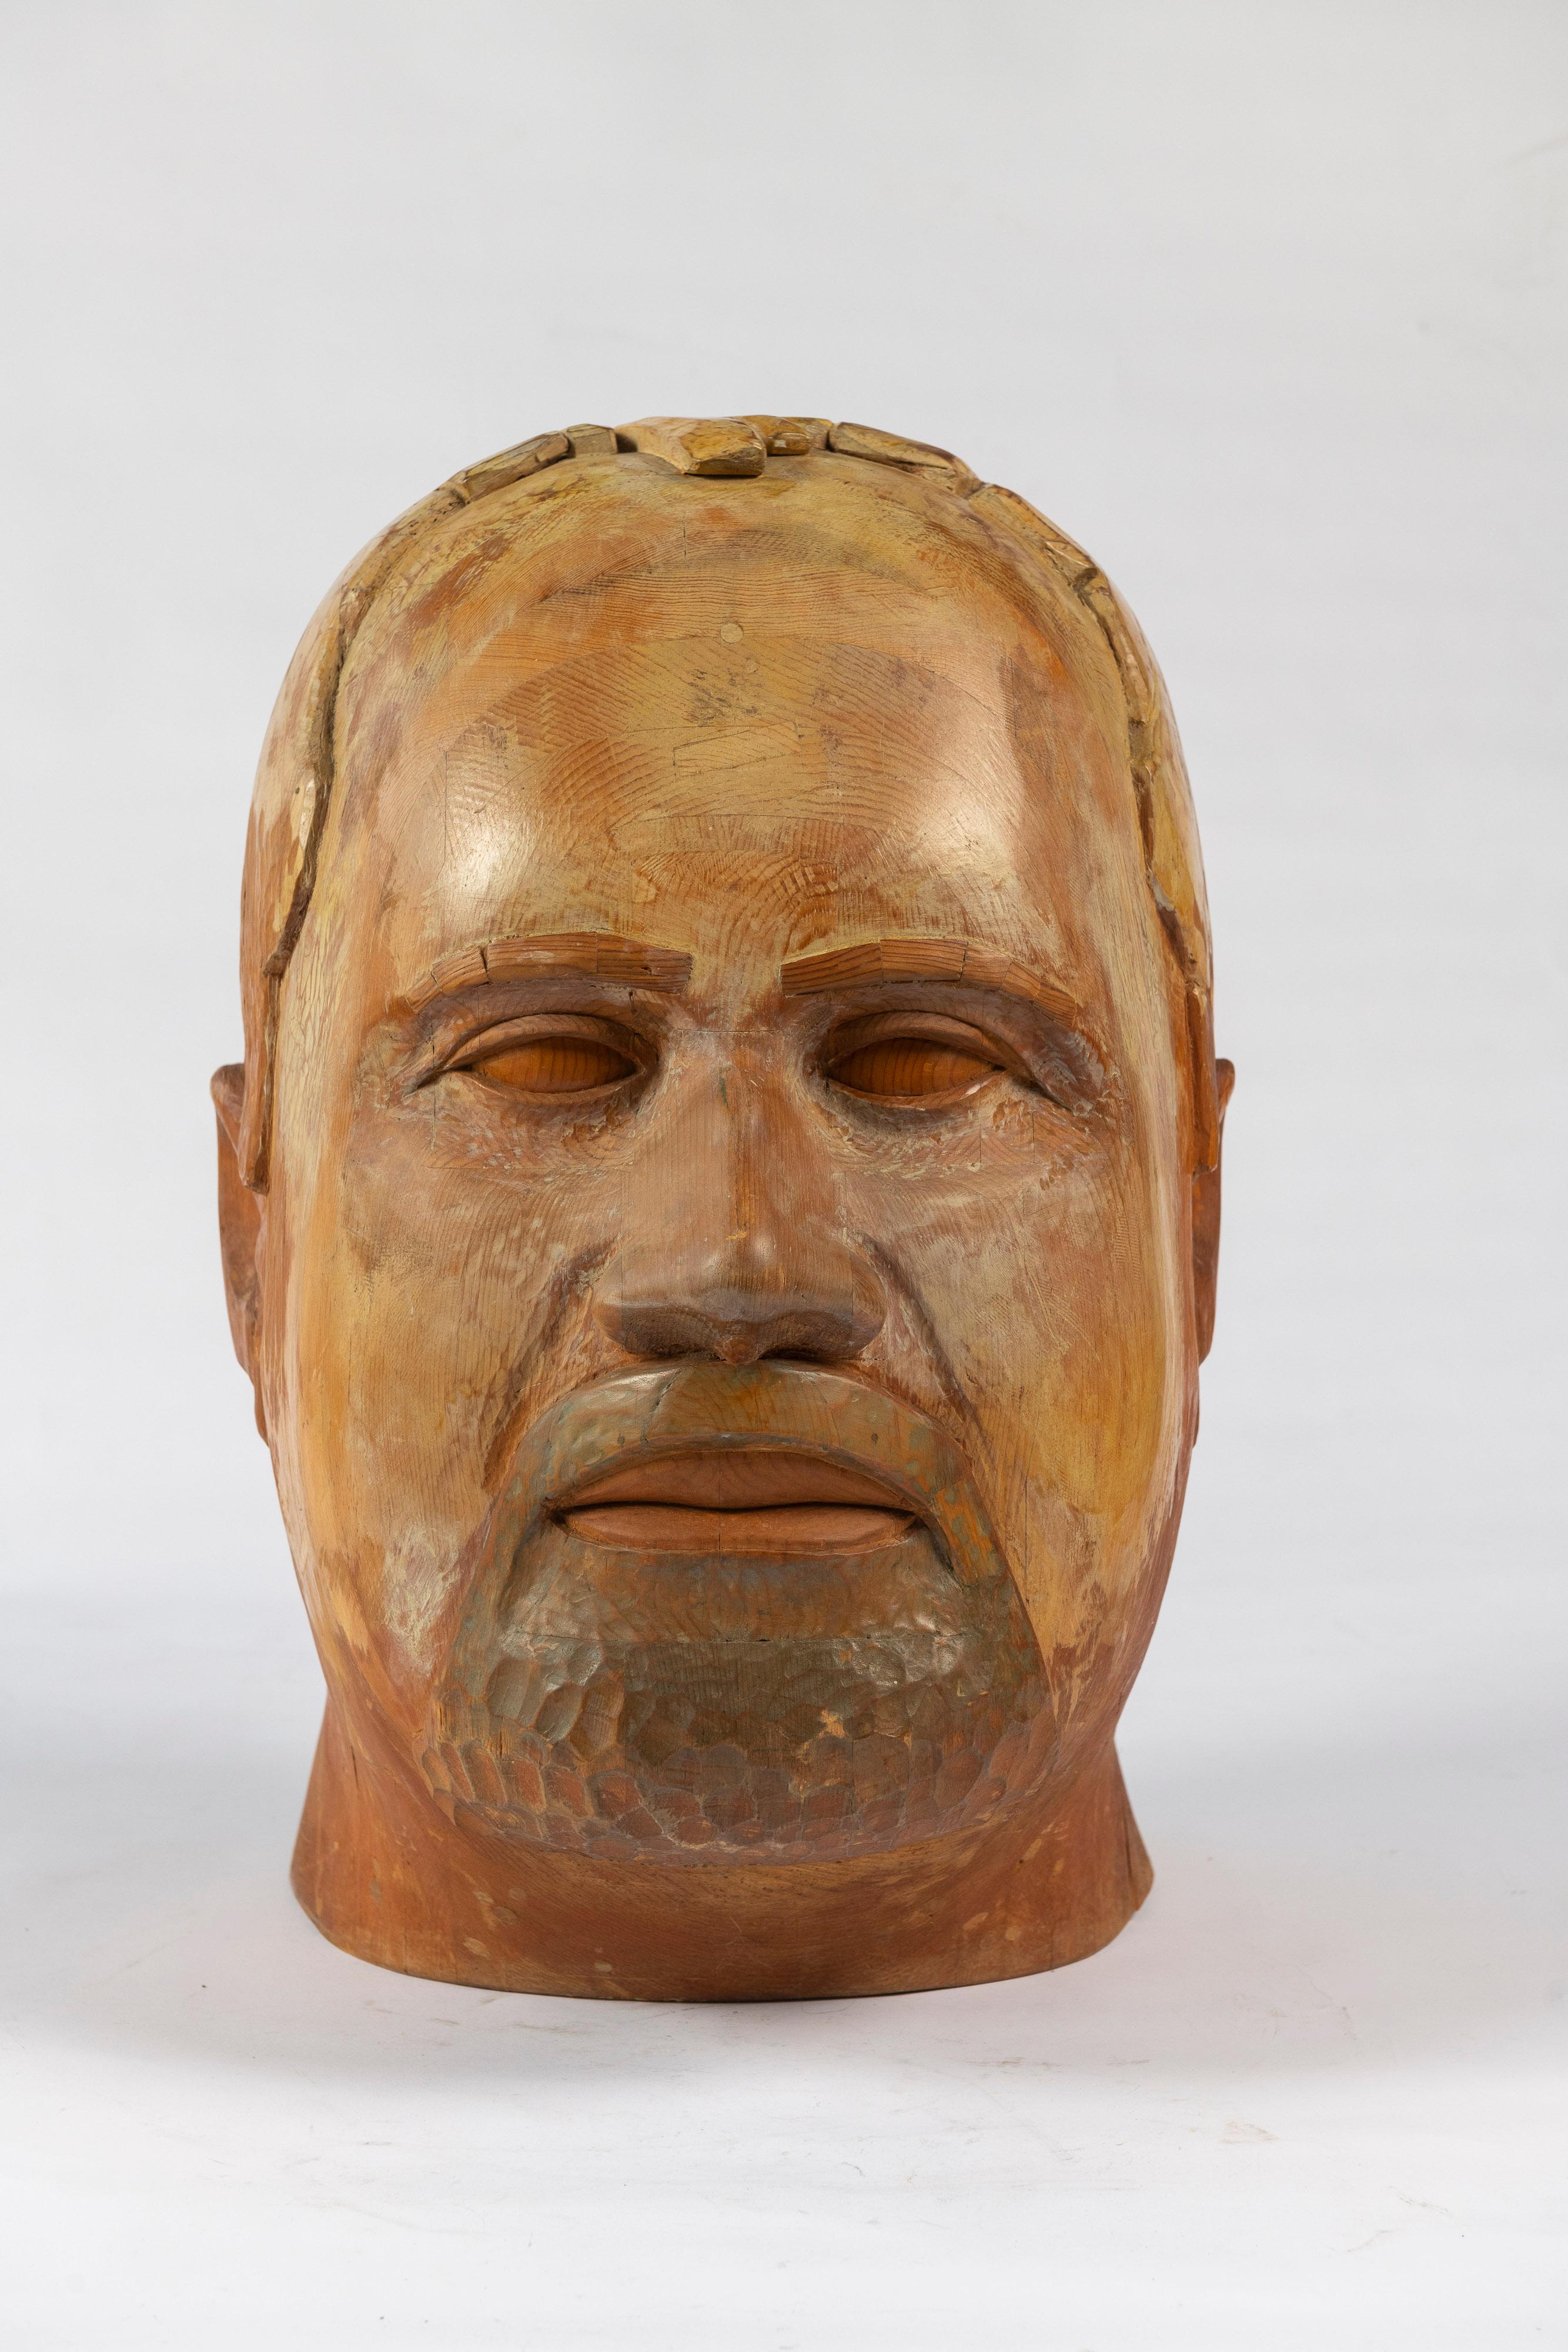 Fascinating, Large Scale carved wooden sculpture of a bearded man's head, signed by D. Granahan, 1967, has some painted features and a beautiful patina. The sculpture is a compelling art work, adding texture and interest to a room. Large enough to